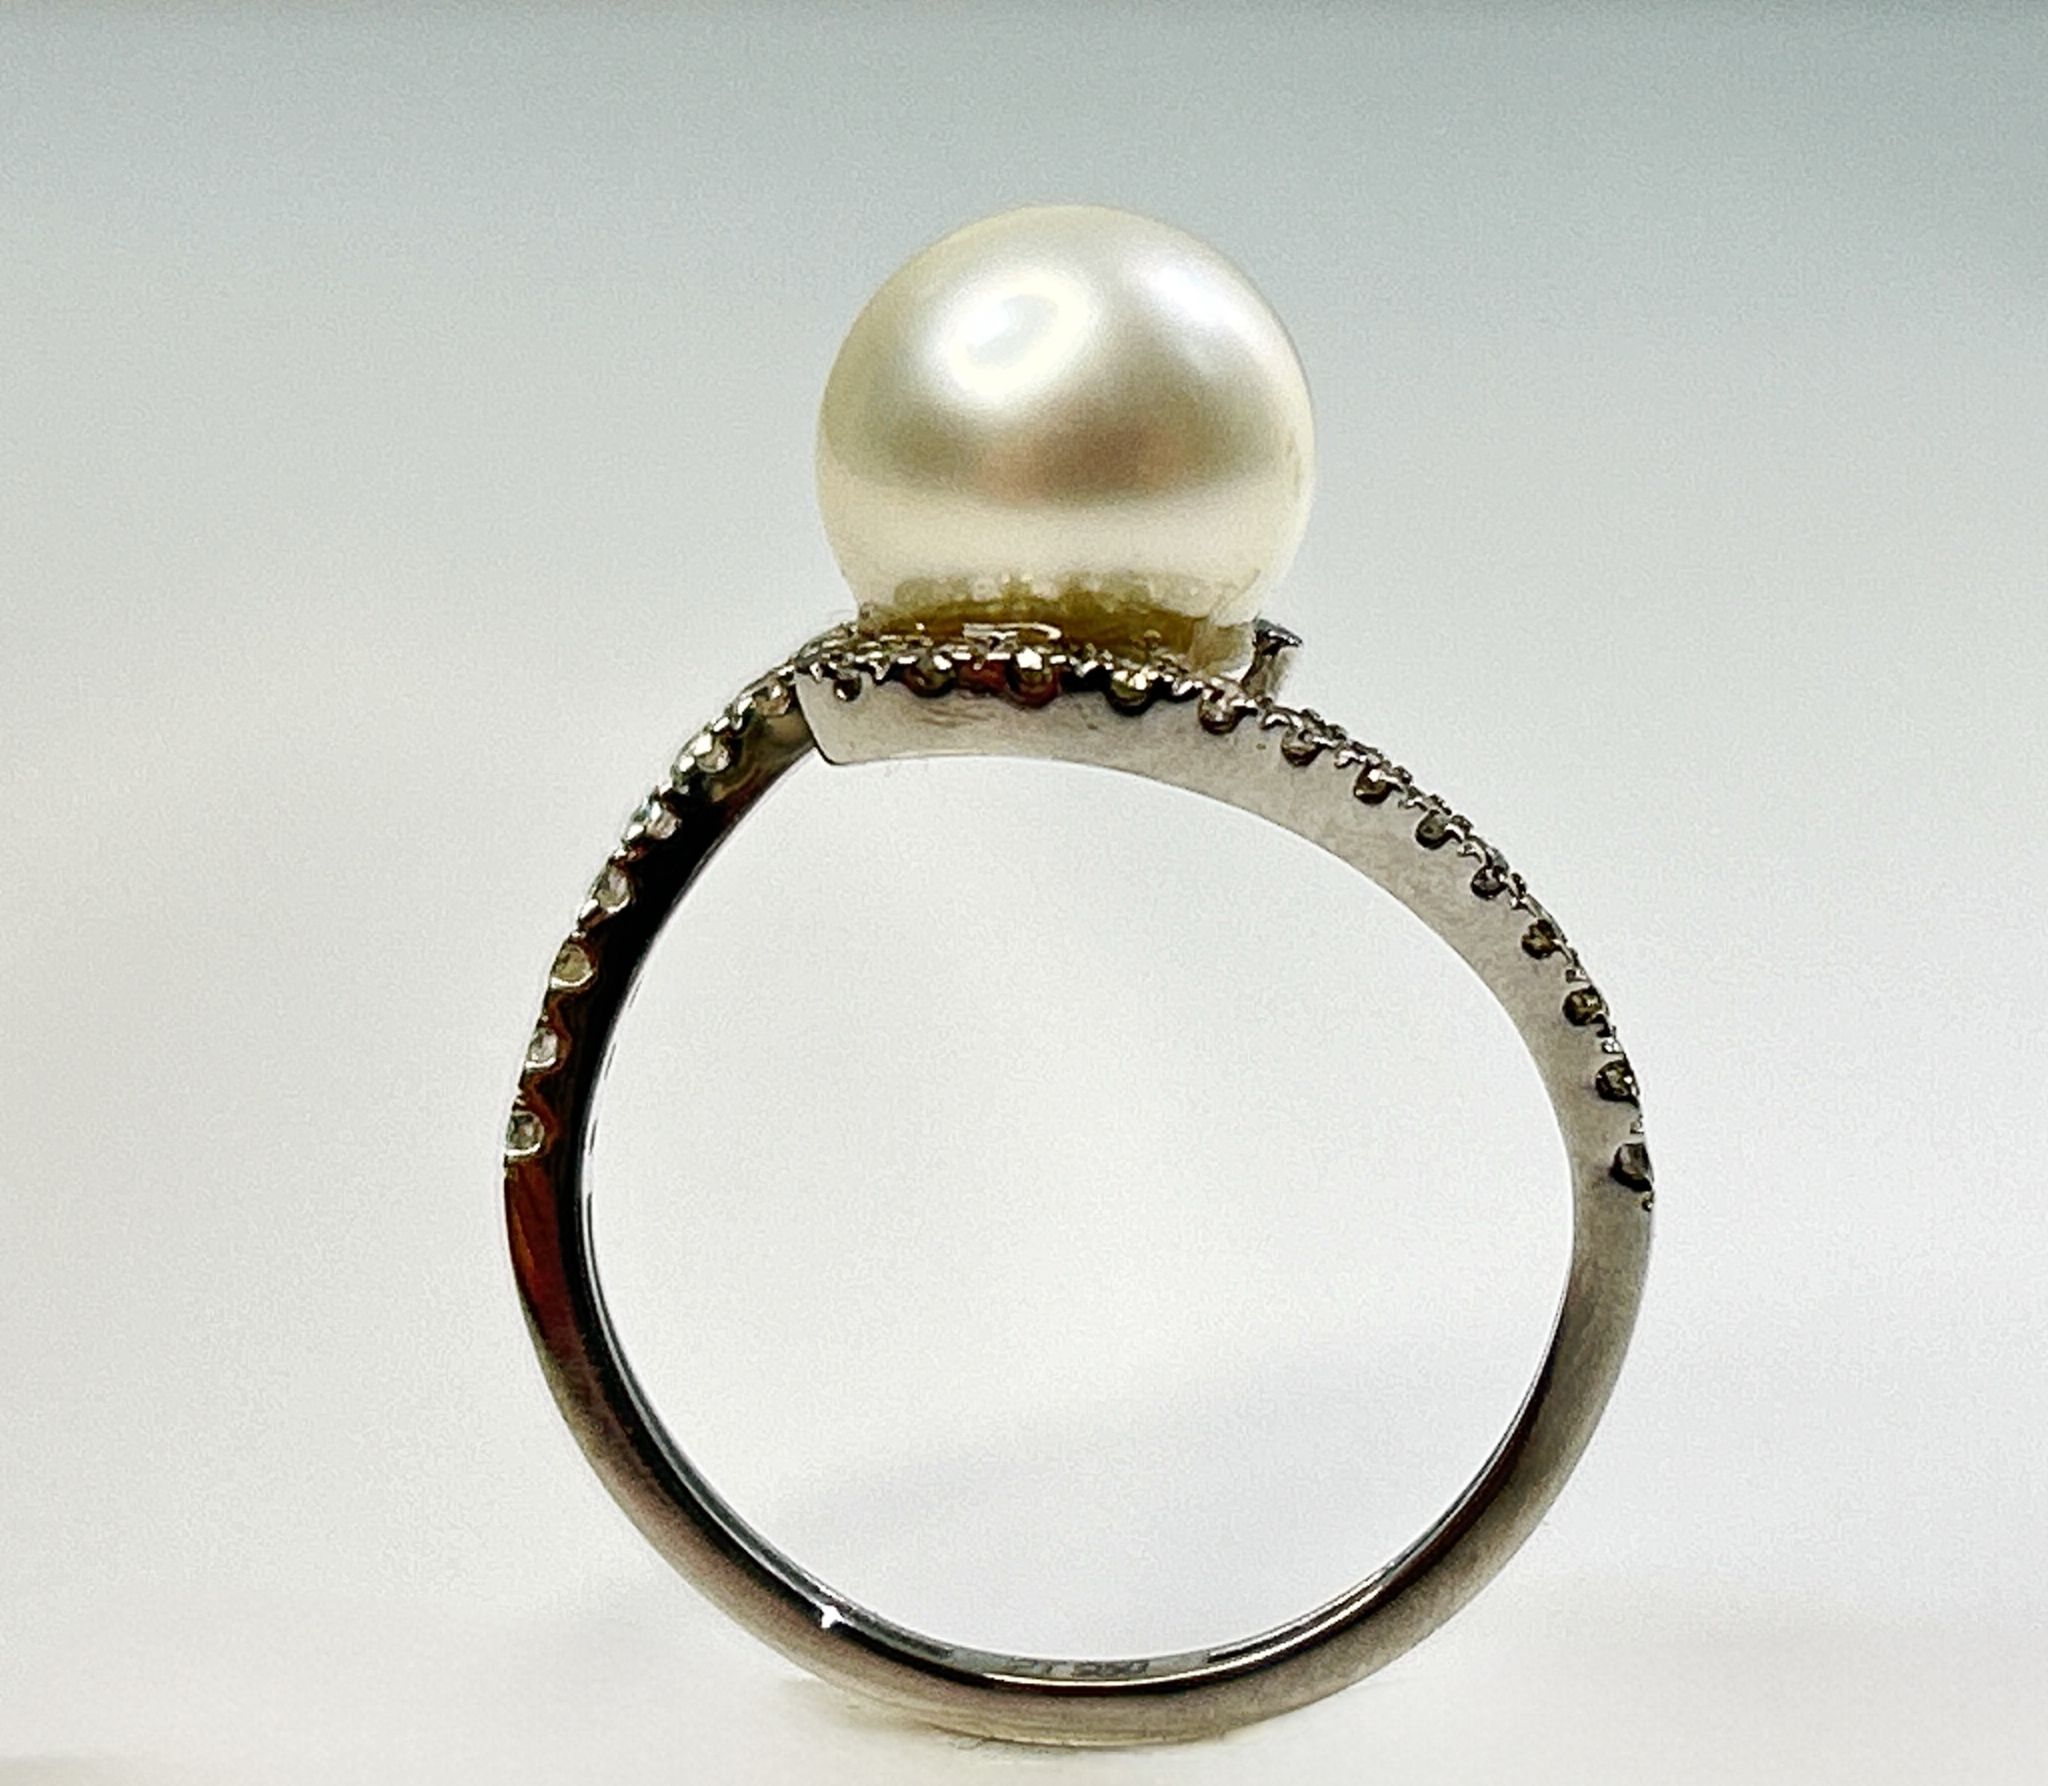 Beautiful 5.12 CT South Sea Pearl With Diamonds & Platinum Ring - Image 4 of 6